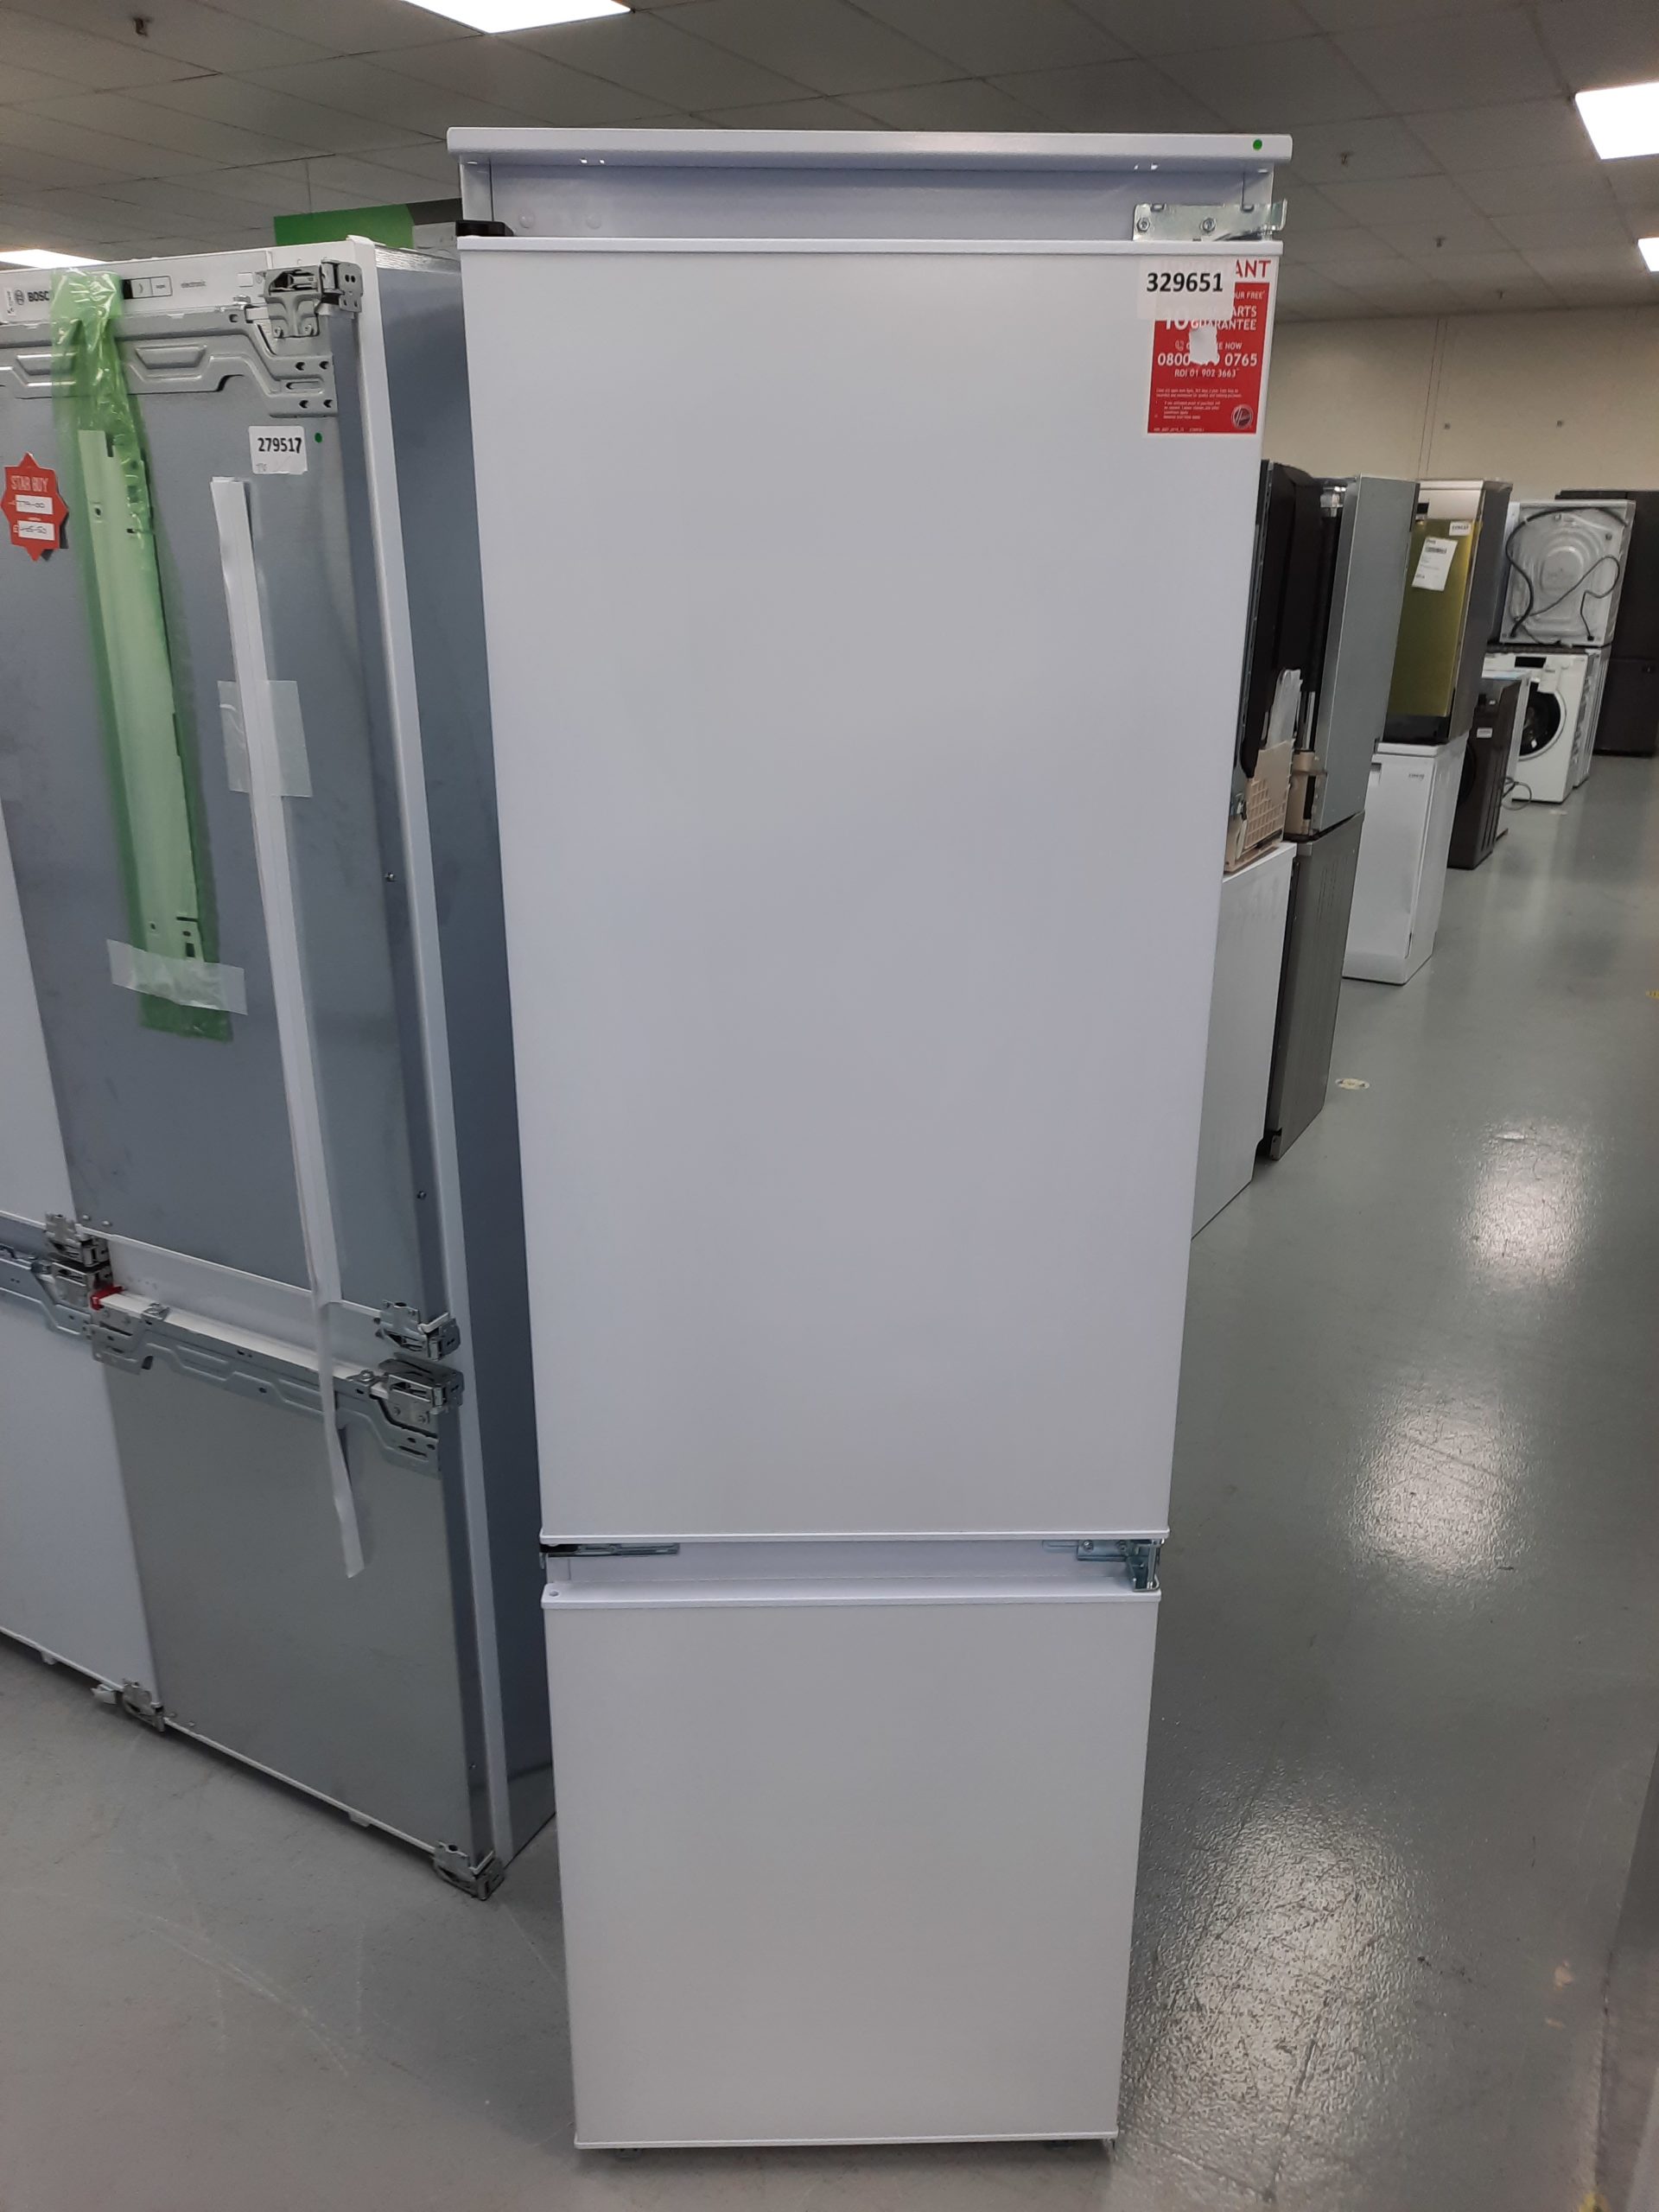 Hoover BHBF172NUK Integrated 70/30 Fridge Freezer White A+ Rated ...